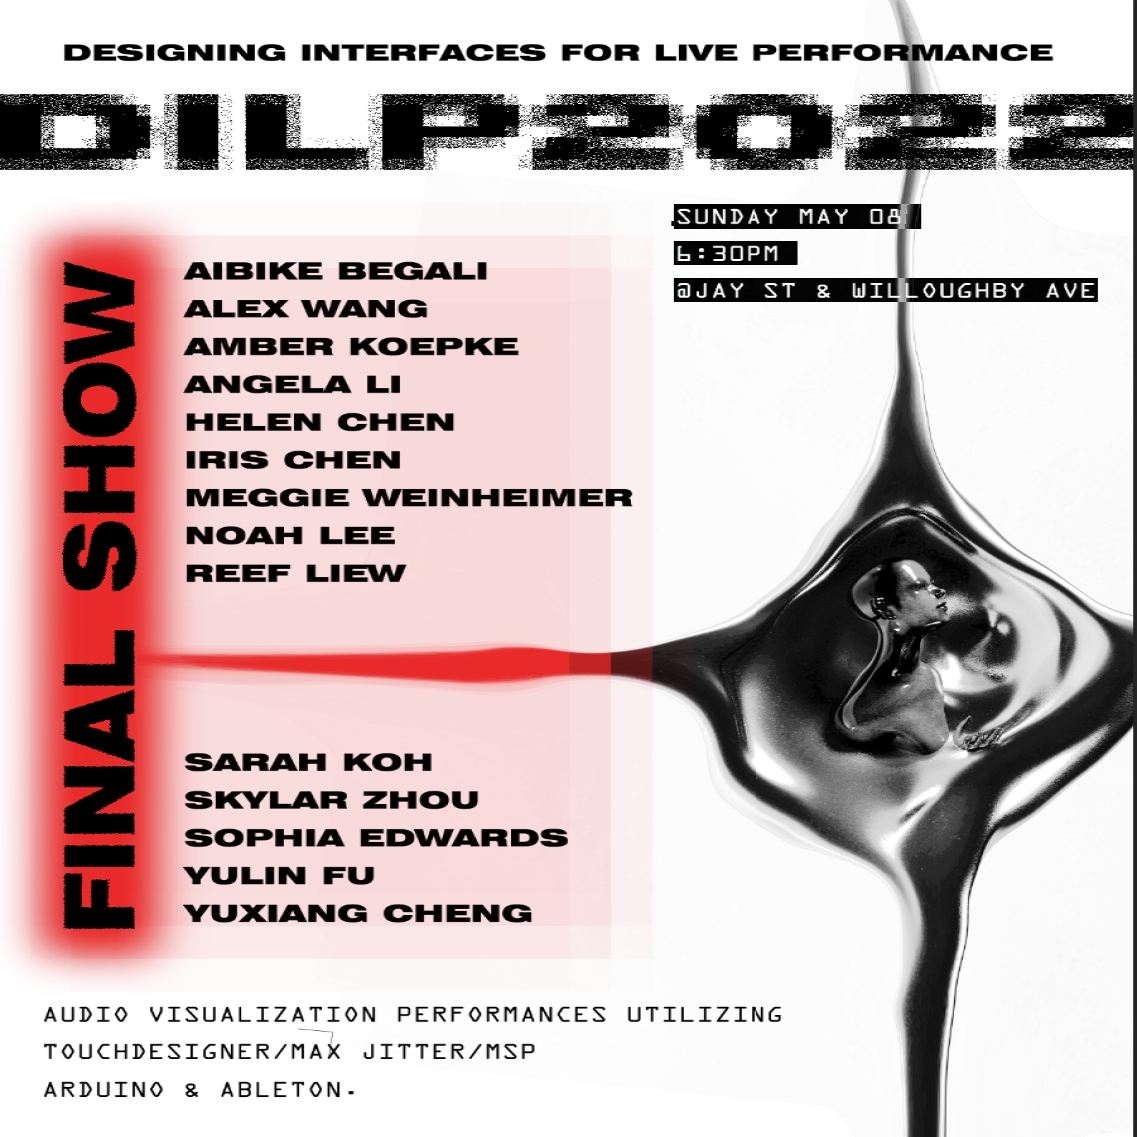 Designing Interfaces for Live Performance Sunday May 8th Doors 6pm Show: 6:30pm 370 Jay St Garage (@ Jay St & Willoughby Ave)